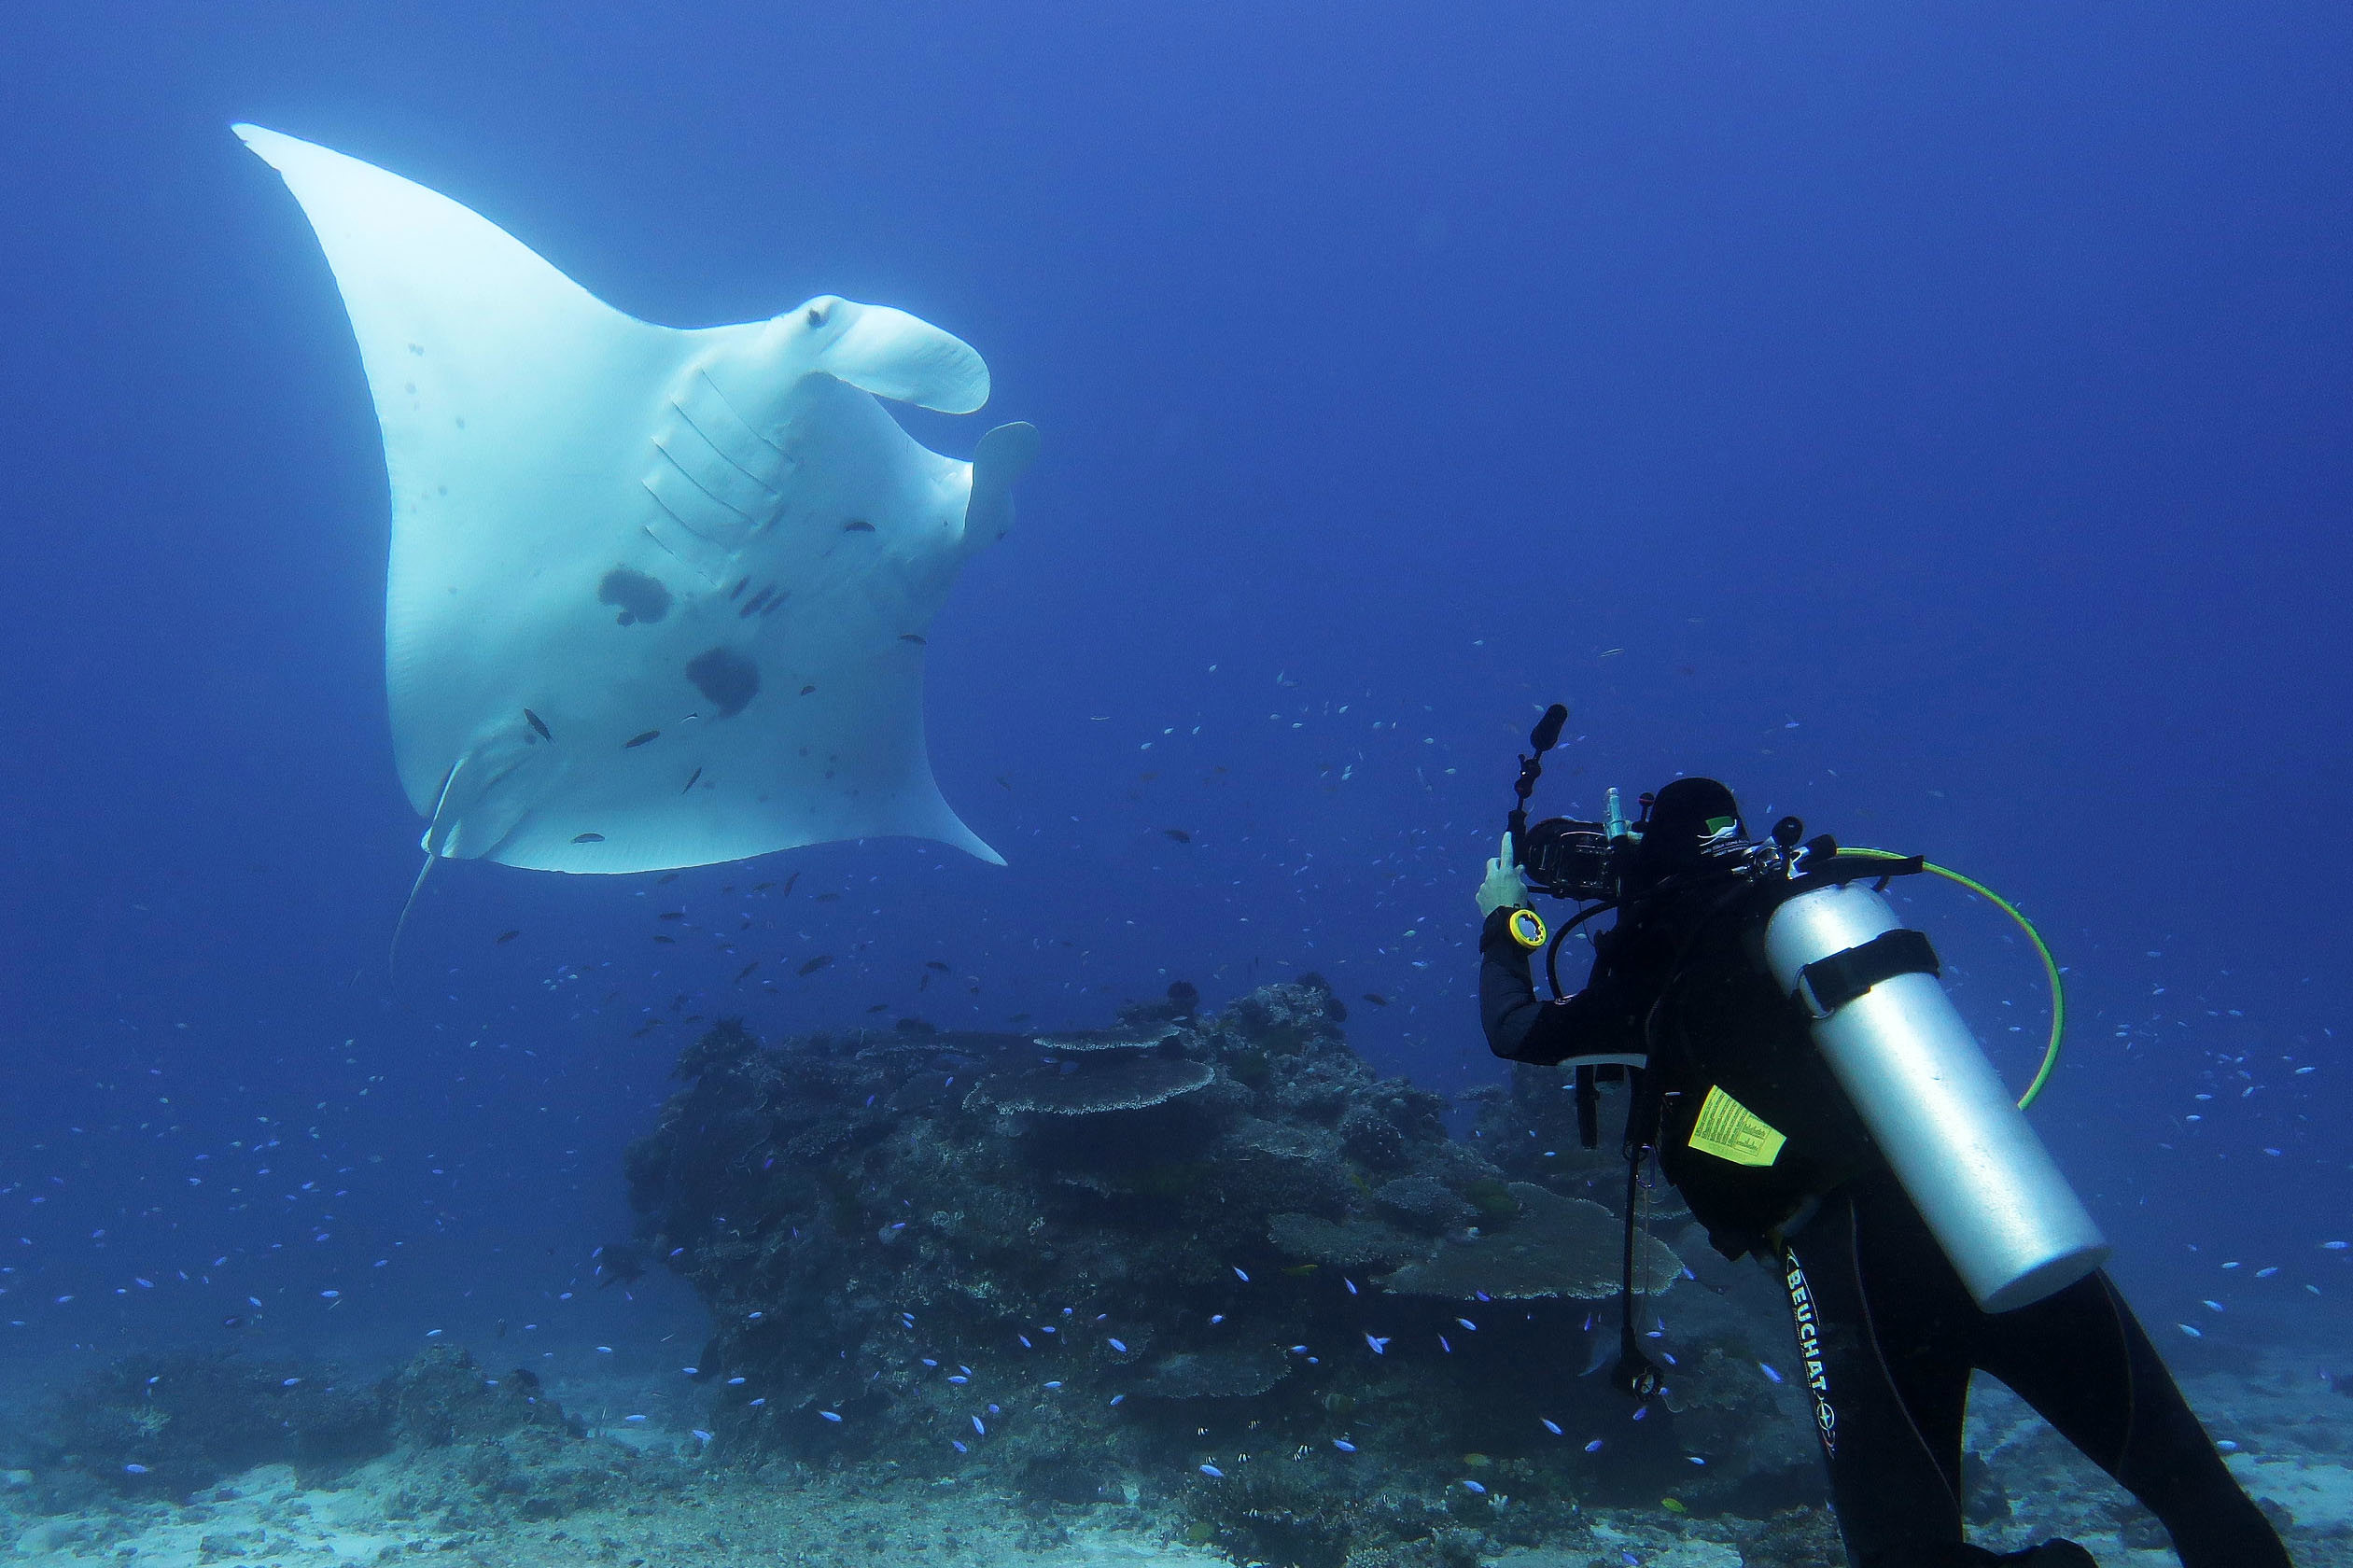 Diver photographing a manta ray underwater